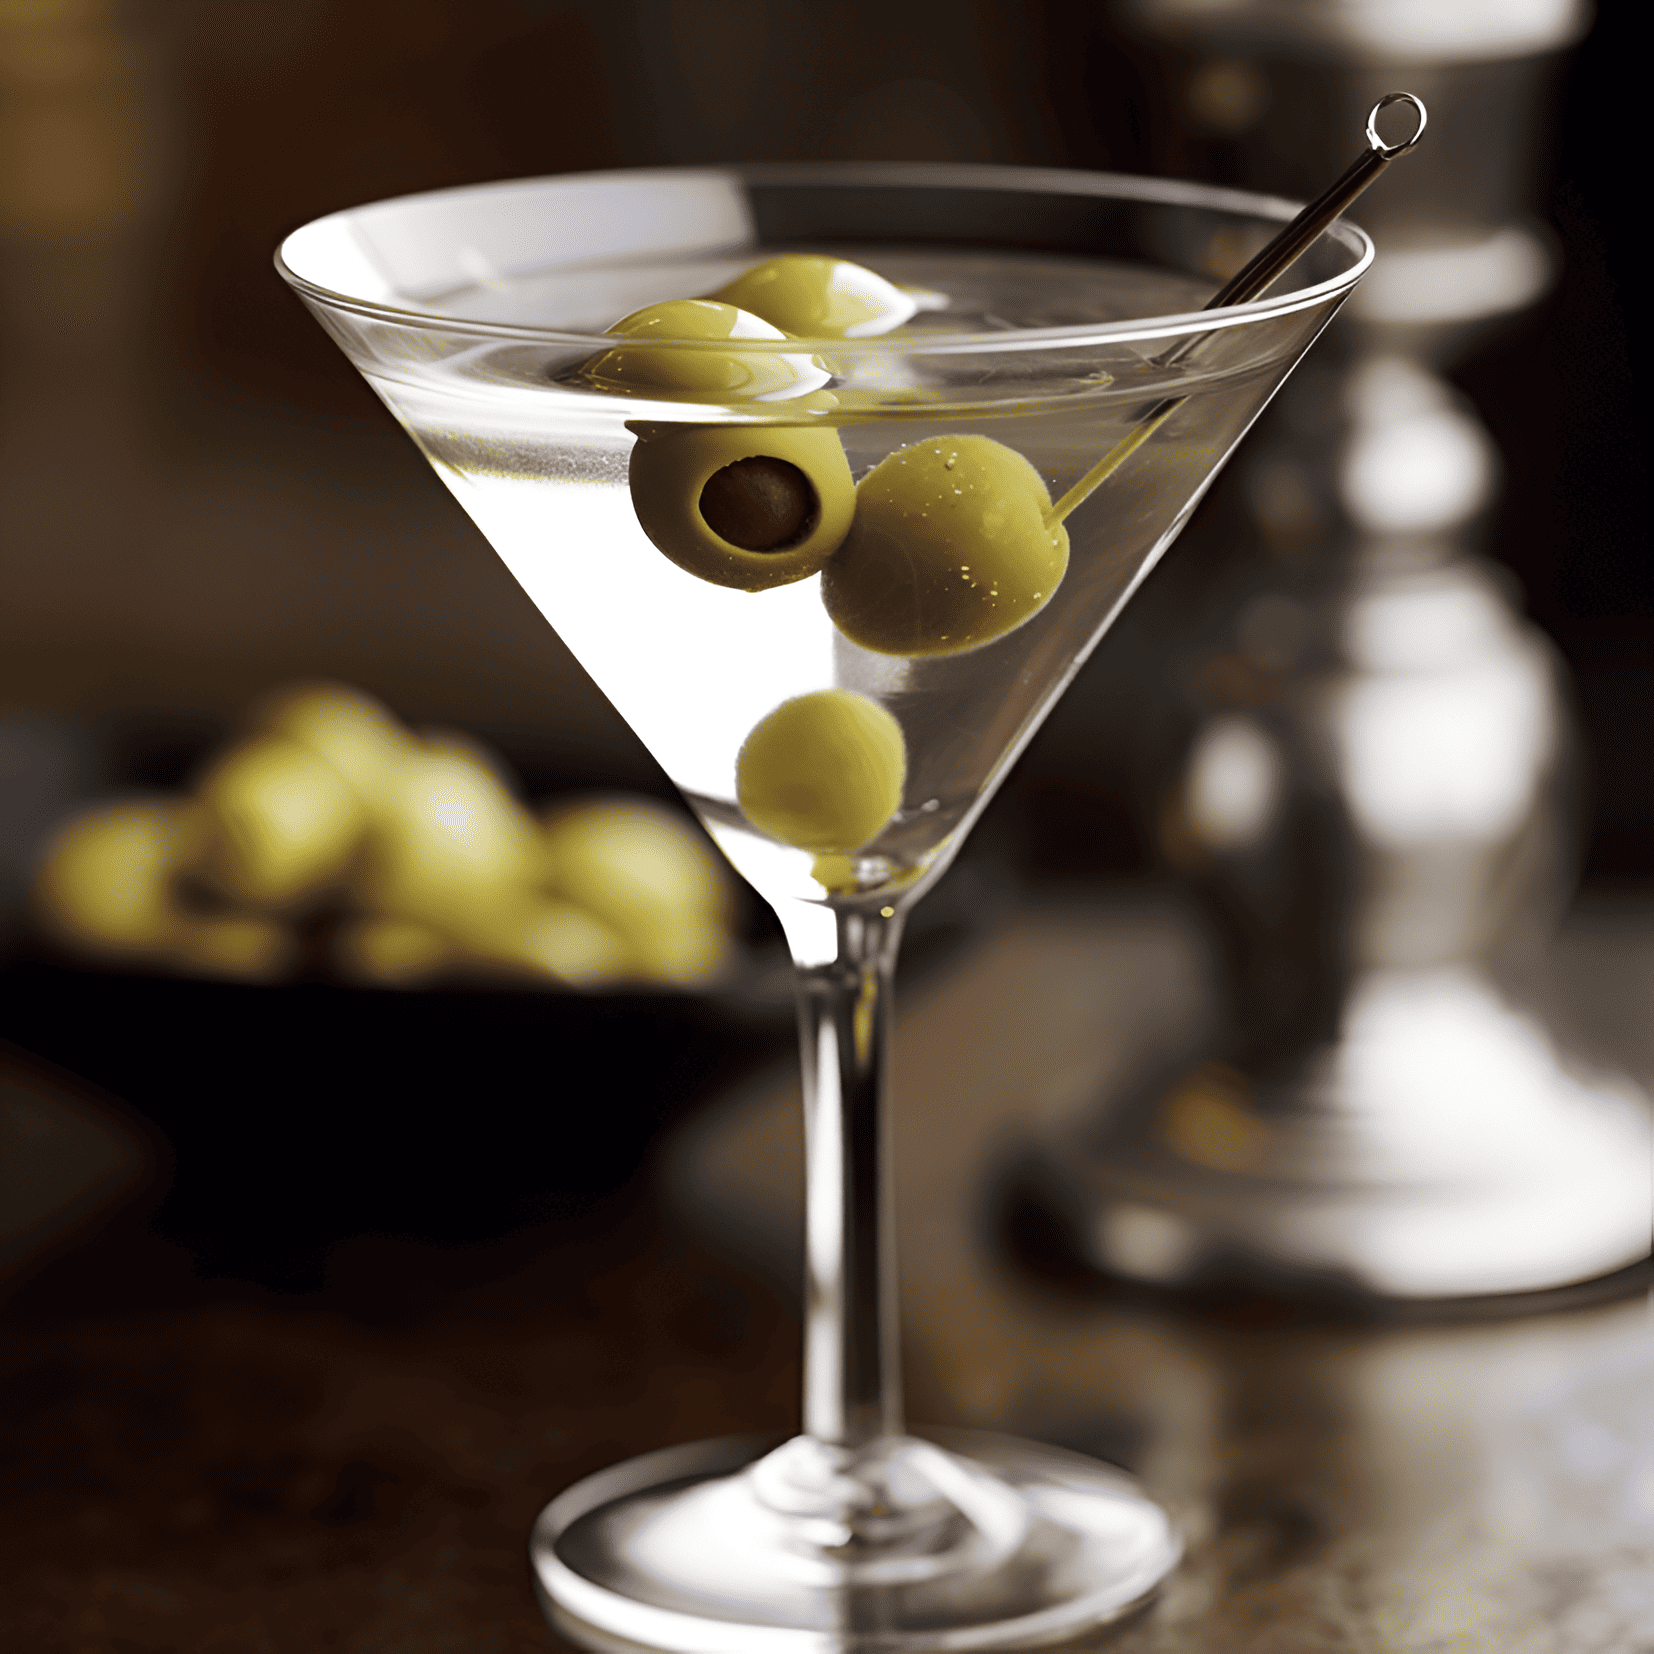 Dirty Martini Cocktail Recipe - The Dirty Martini has a bold, savory taste with a hint of saltiness from the olive brine. It is a strong, slightly bitter cocktail with a smooth finish.